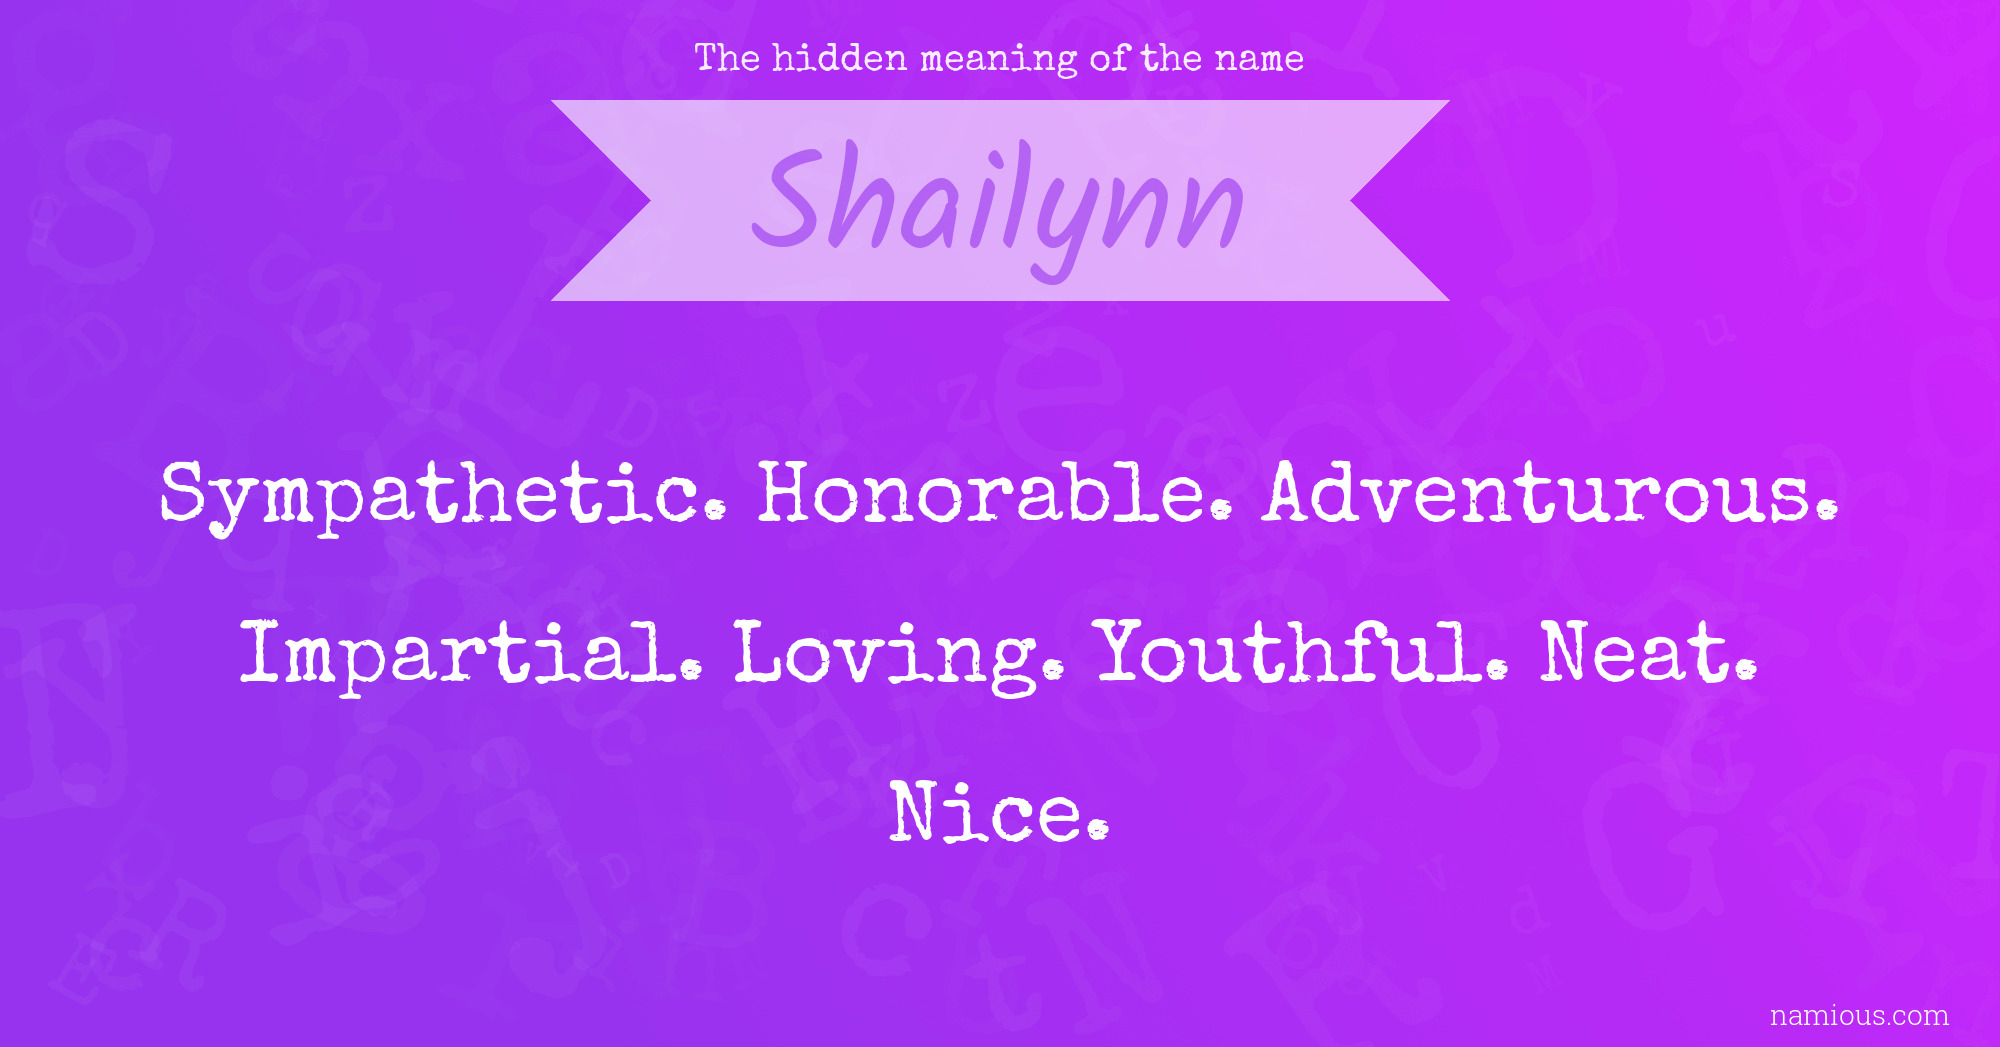 The hidden meaning of the name Shailynn